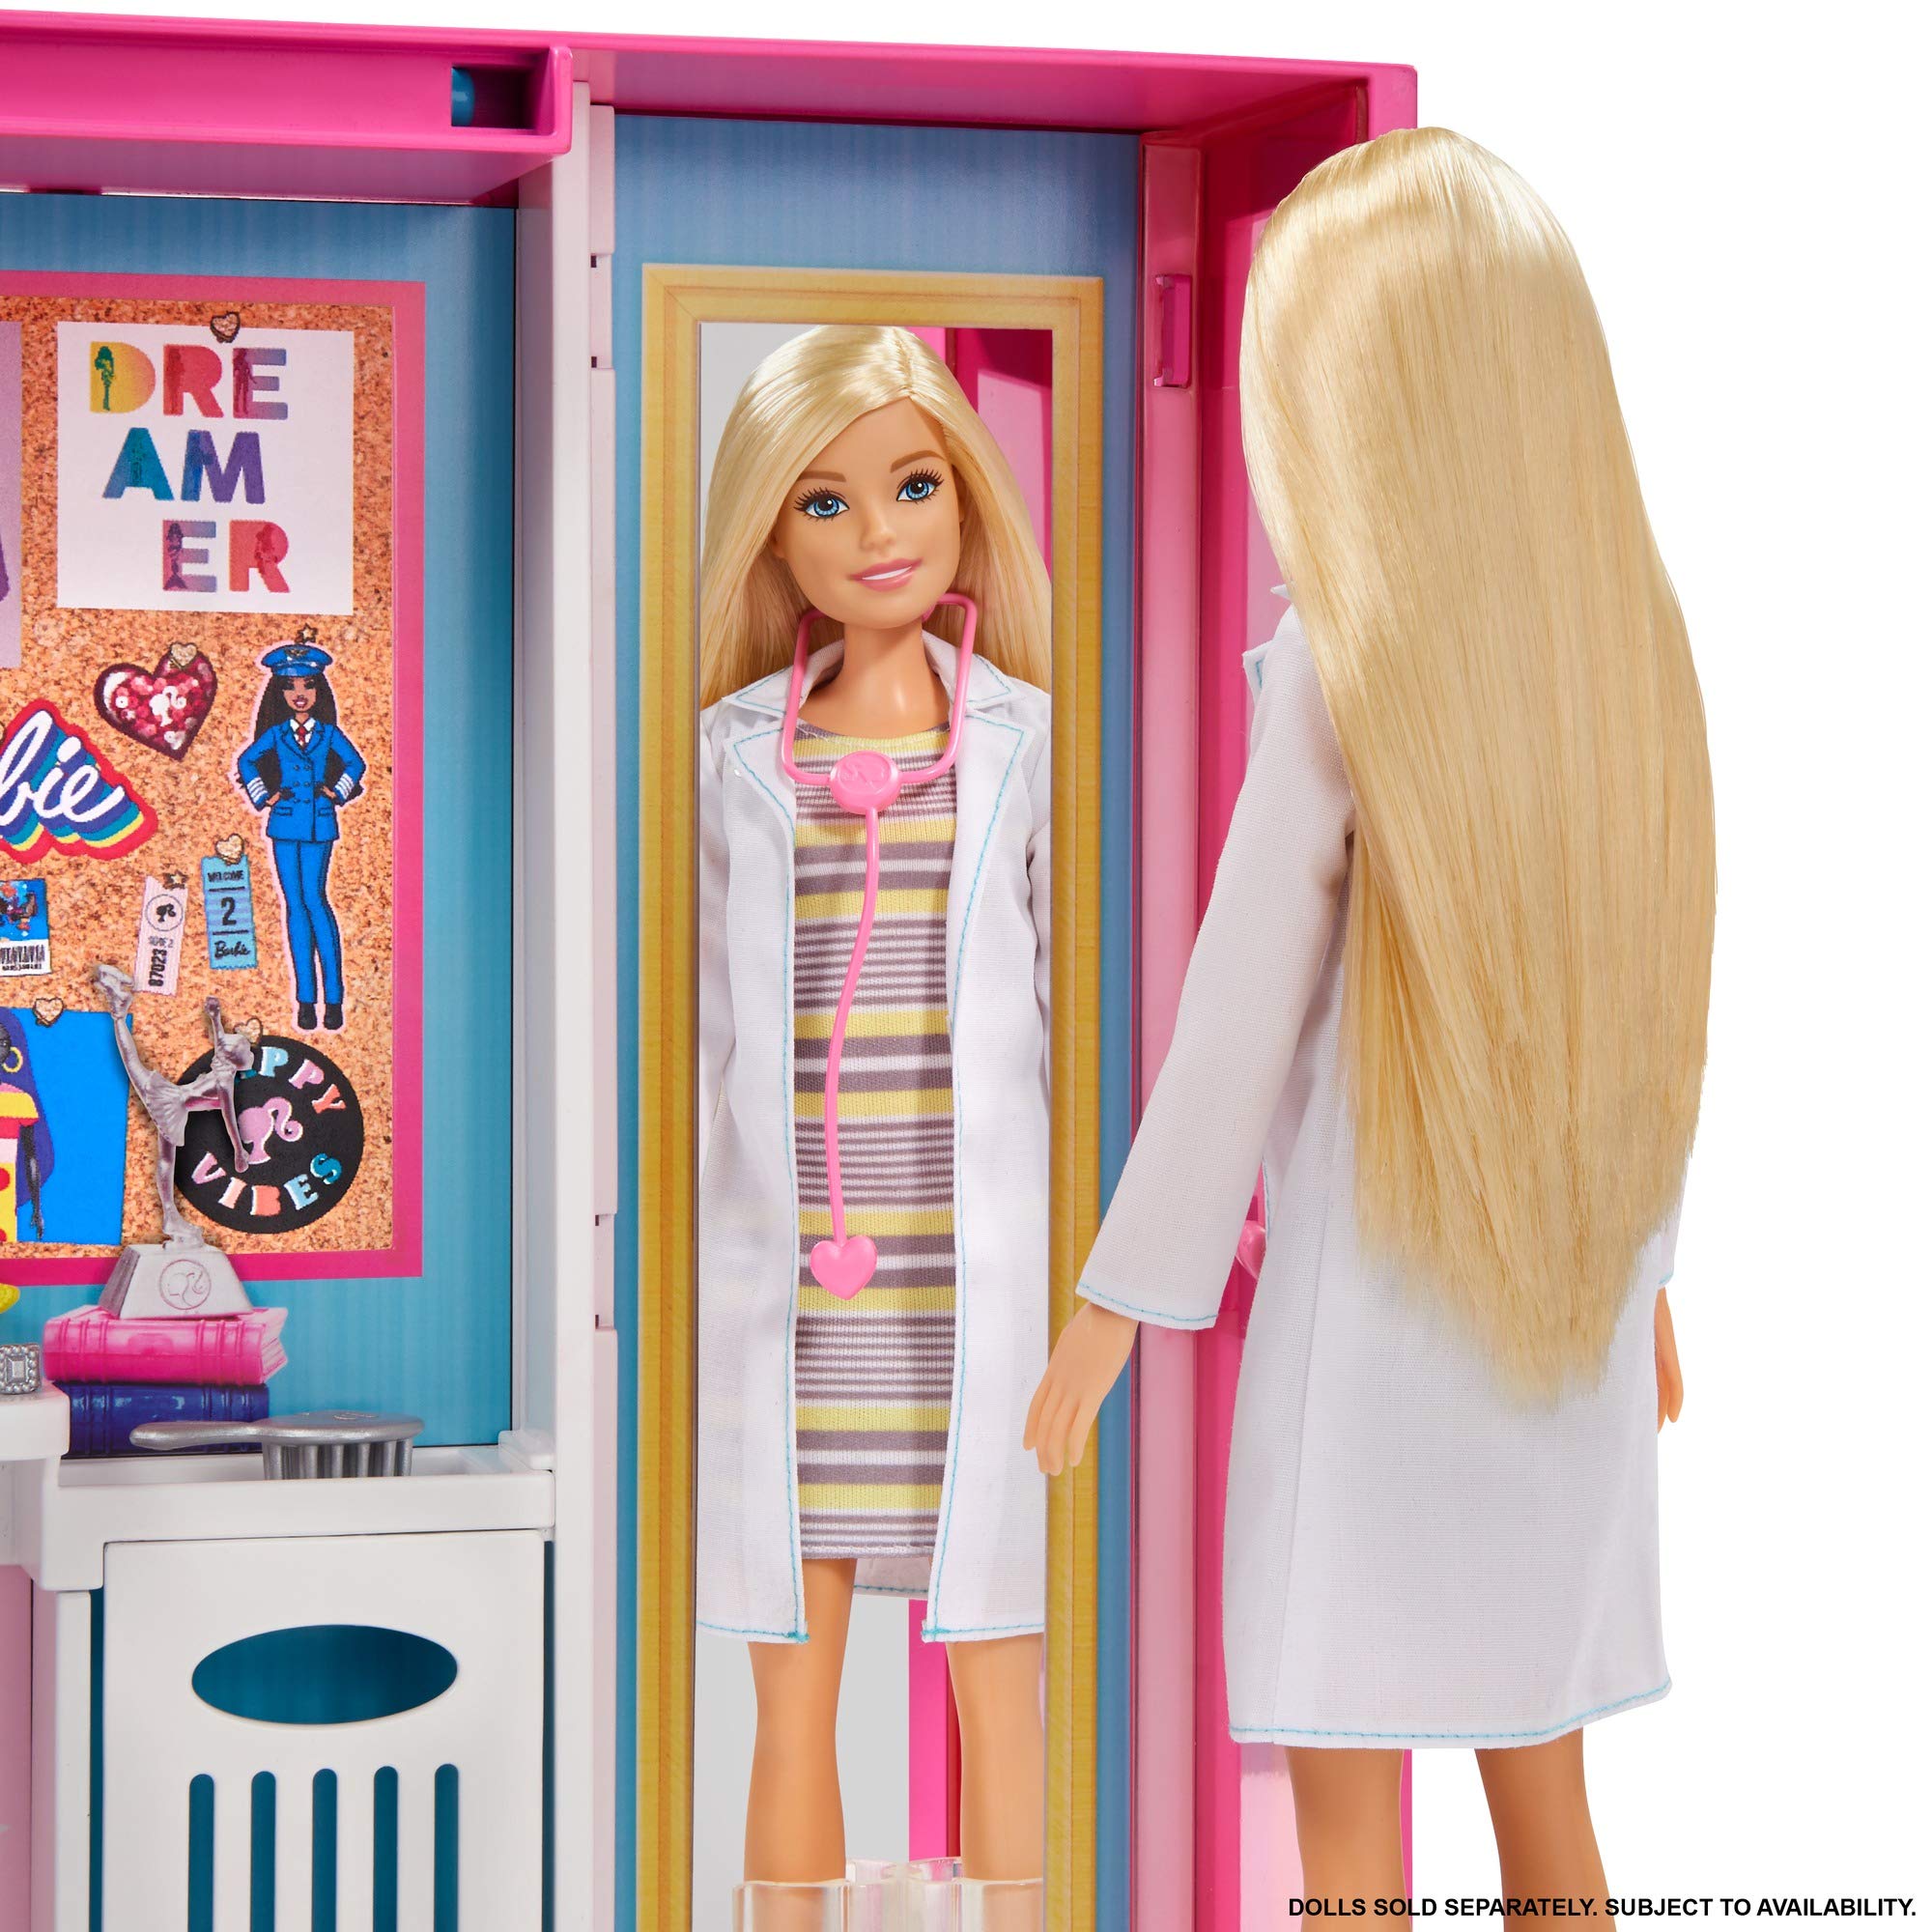 Barbie Dream Closet Playset with 30+ Clothes and Accessories Including 5 Outfits, Plus Mirror, Desk and Rotating Rack